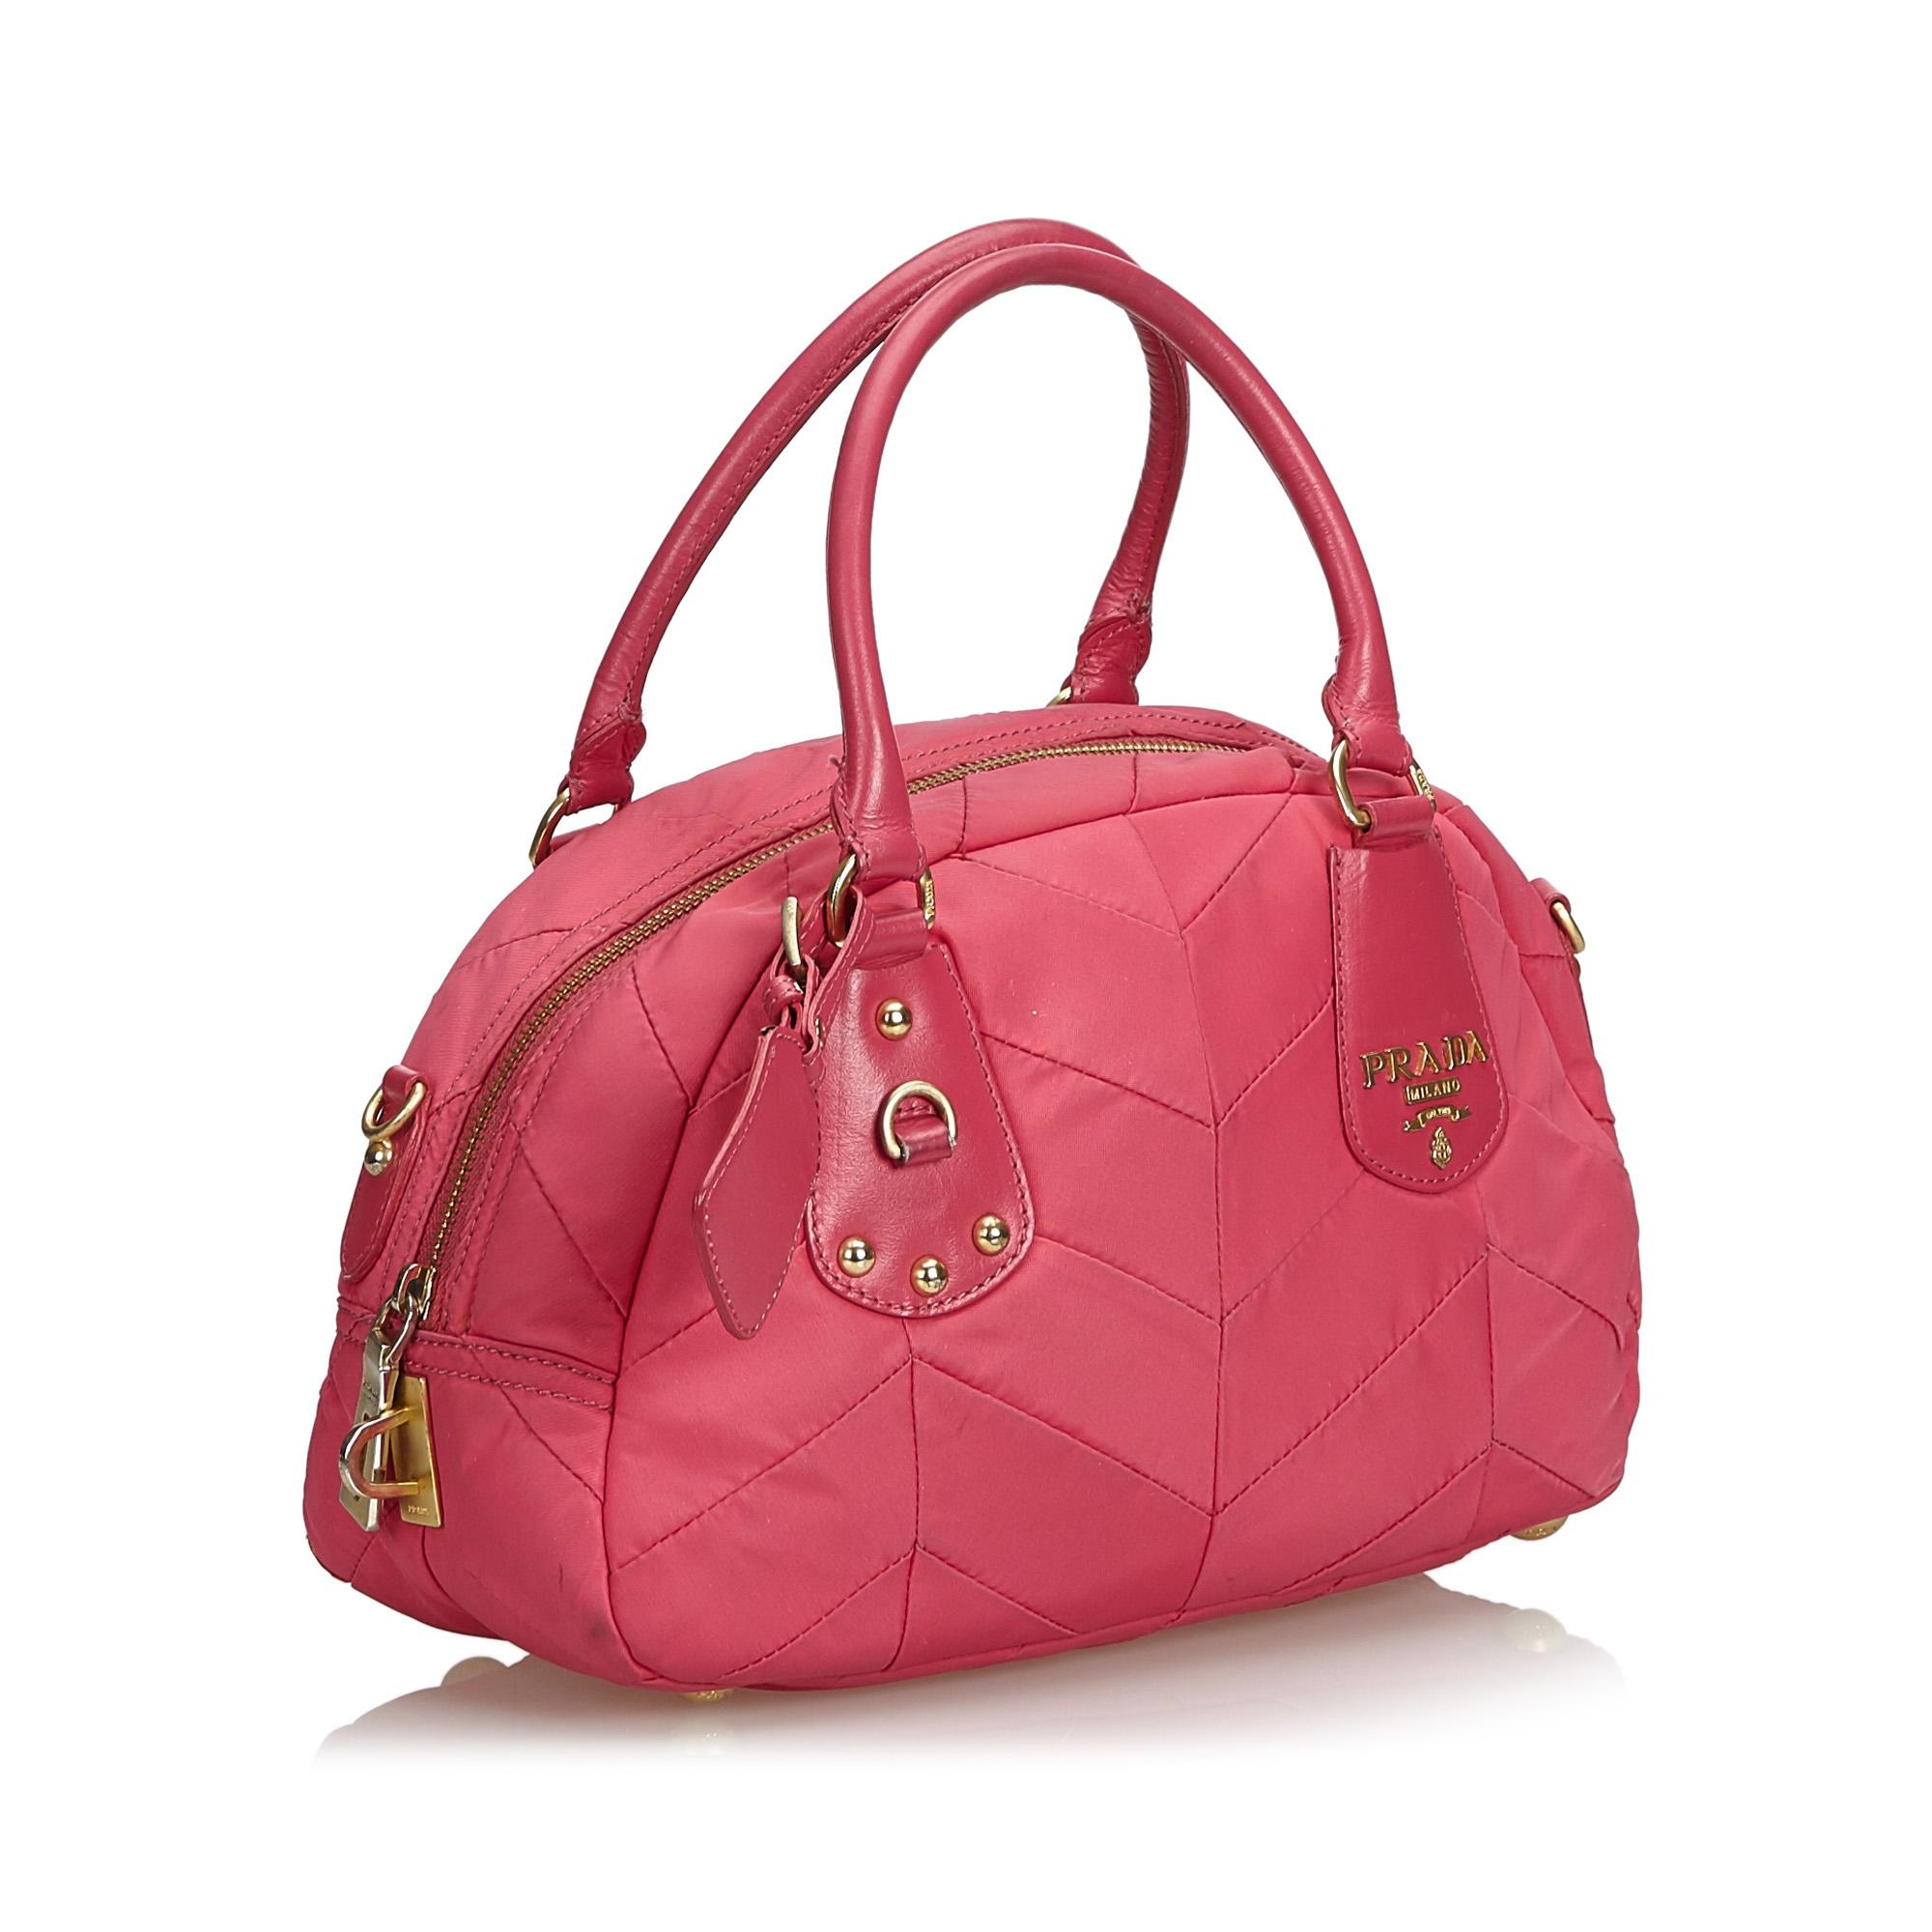 This handbag features a quilted nylon body, rolled leather handles, a top zip closure, and interior zip and slip pockets. It carries as B+ condition rating.

Inclusions: 
This item does not come with inclusions.

Dimensions:
Length: 19.00 cm
Width: